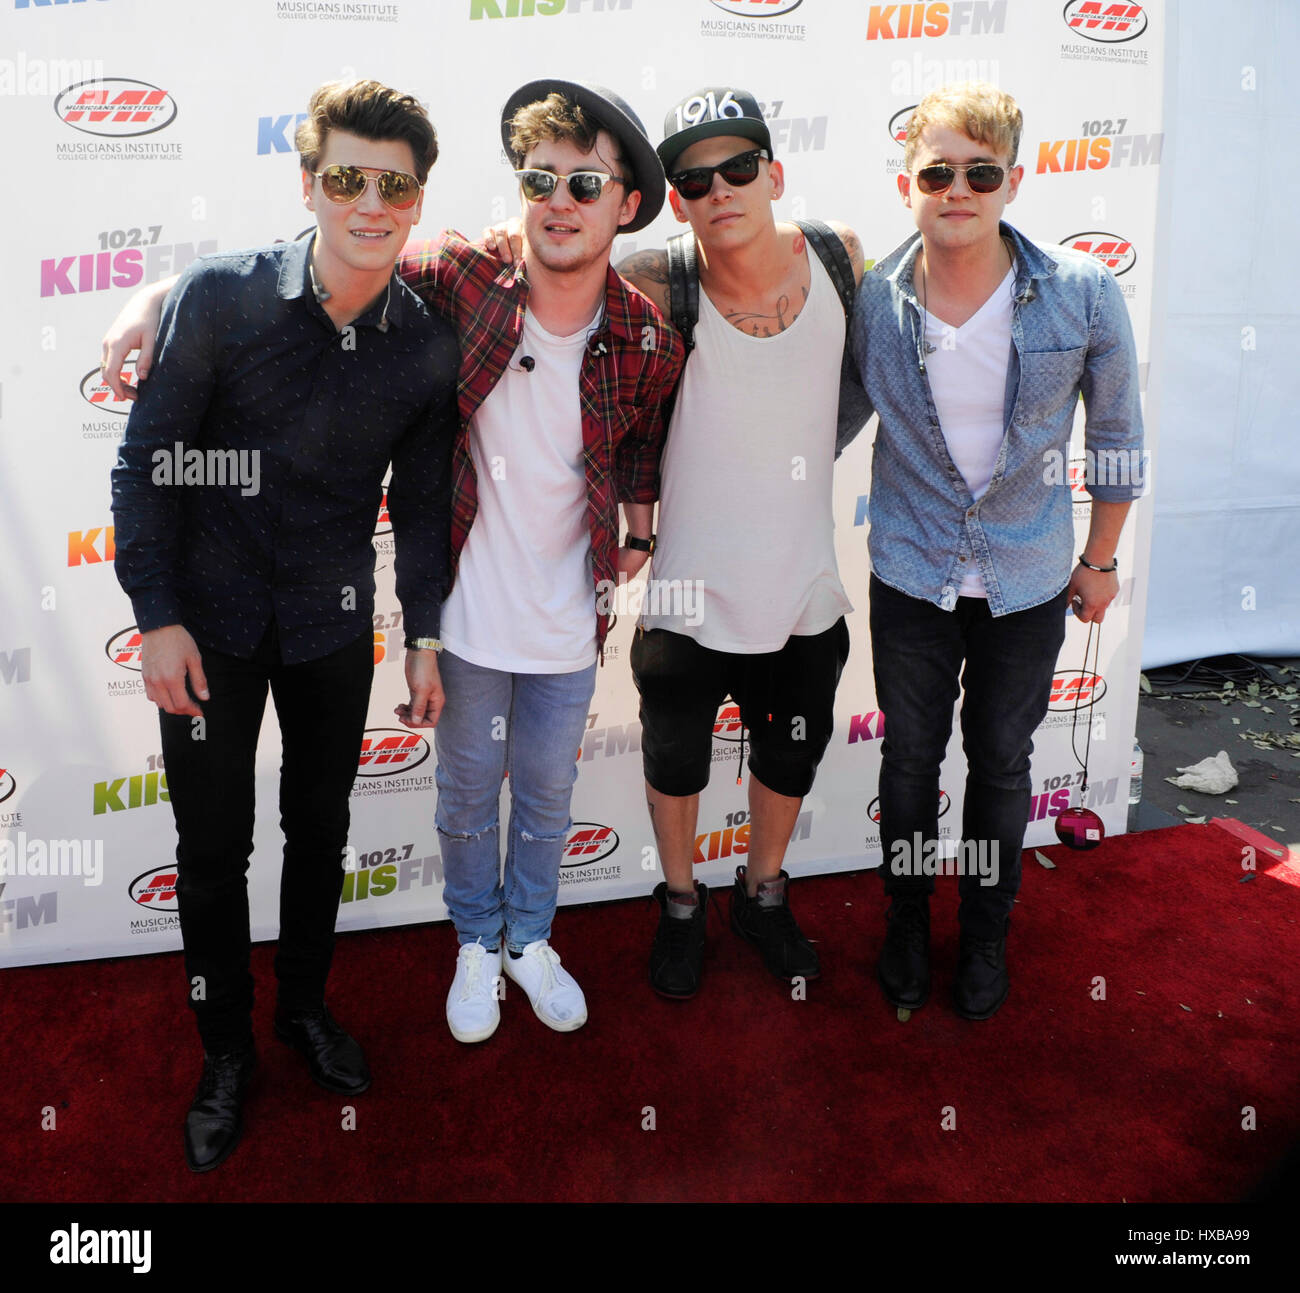 Jake Roche and Rixton backstage red carpet during 102.7 KIIS FM's 2014 Wango Tango at StubHub Center on May 10, 2014 in Los Angeles, California. Stock Photo